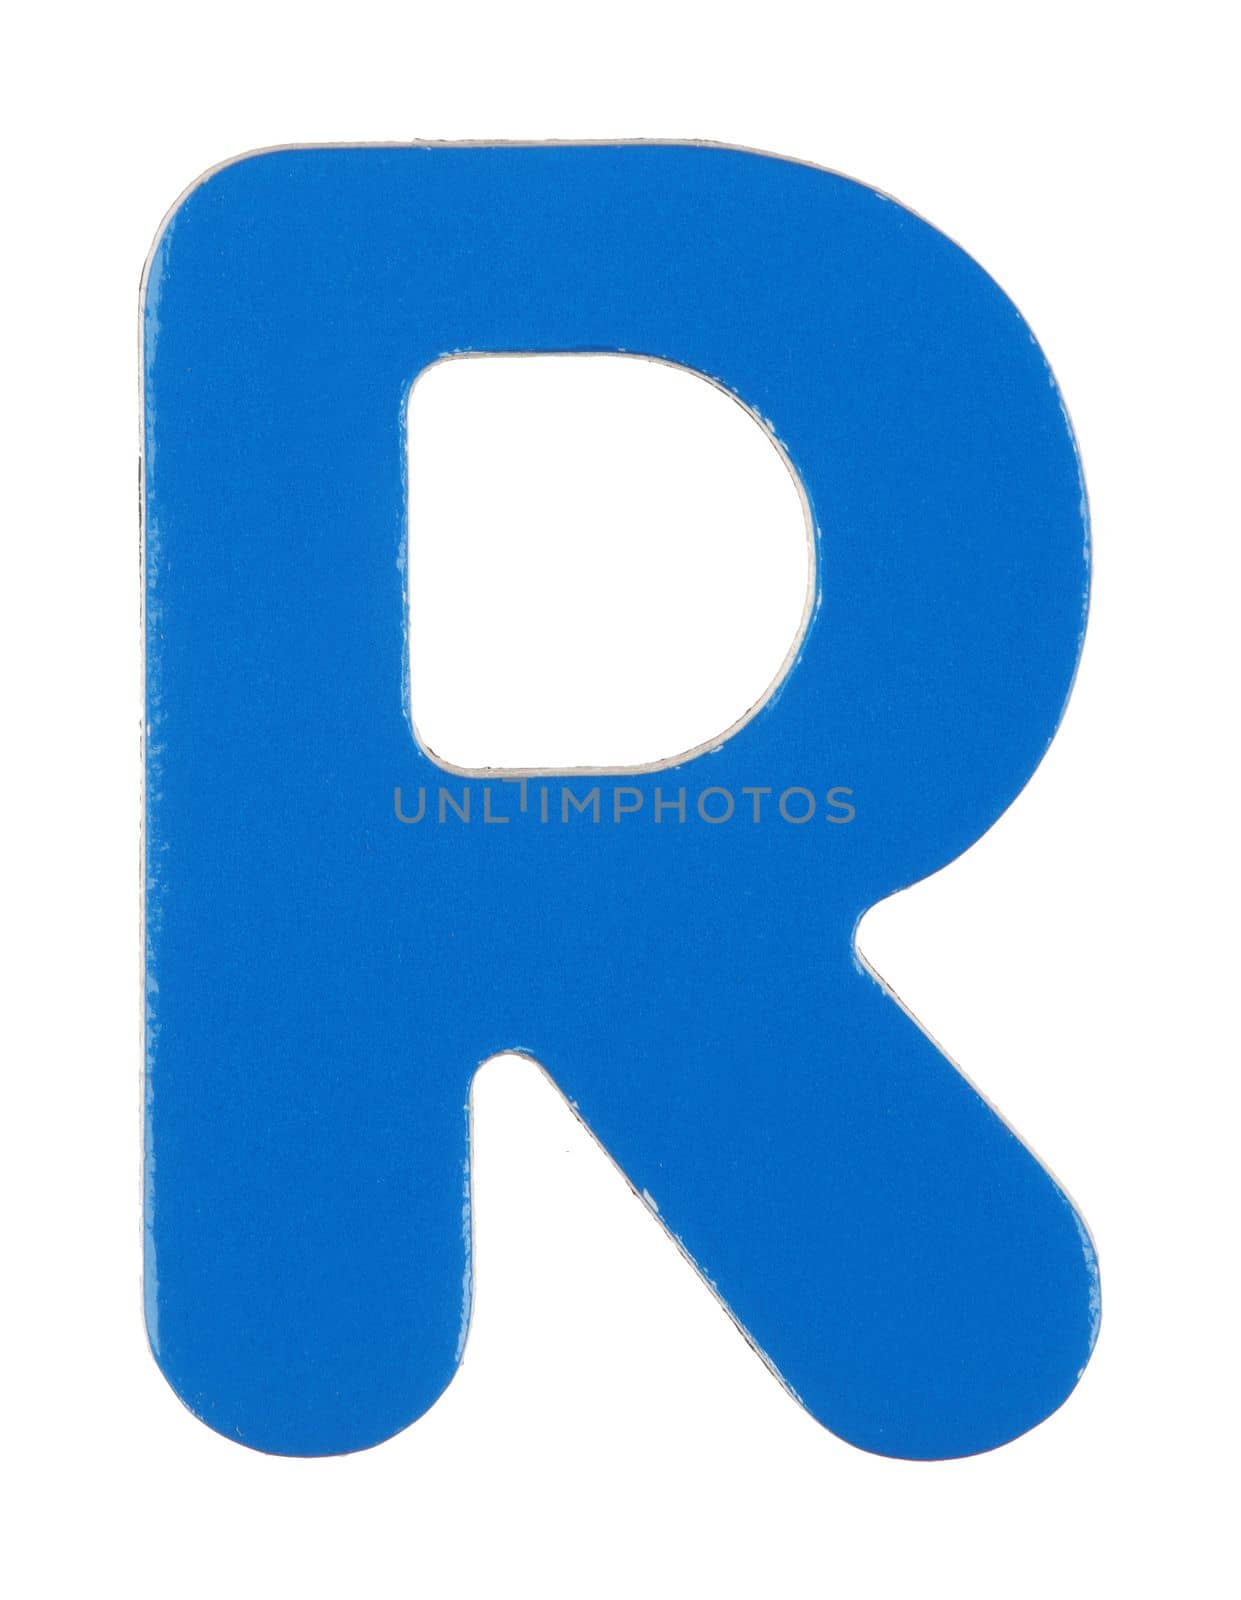 Upper case R magnetic letter with clipping path by VivacityImages